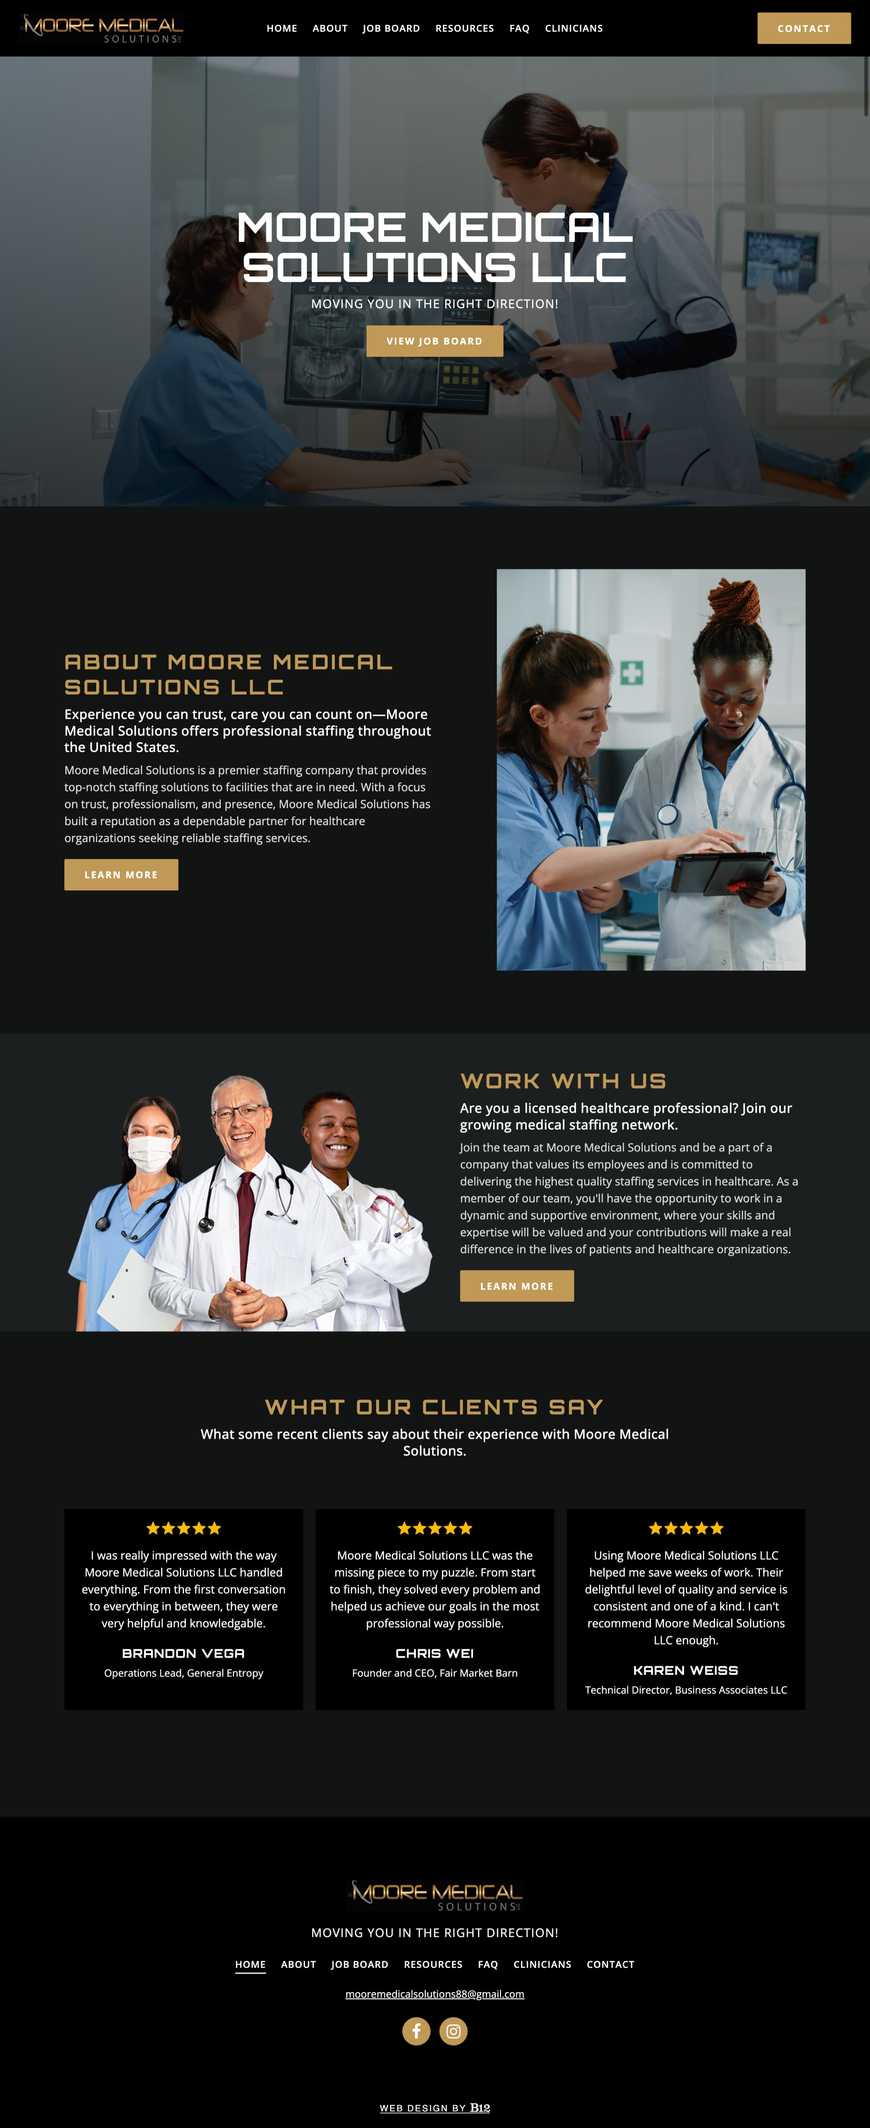 Moore Medical Solutions